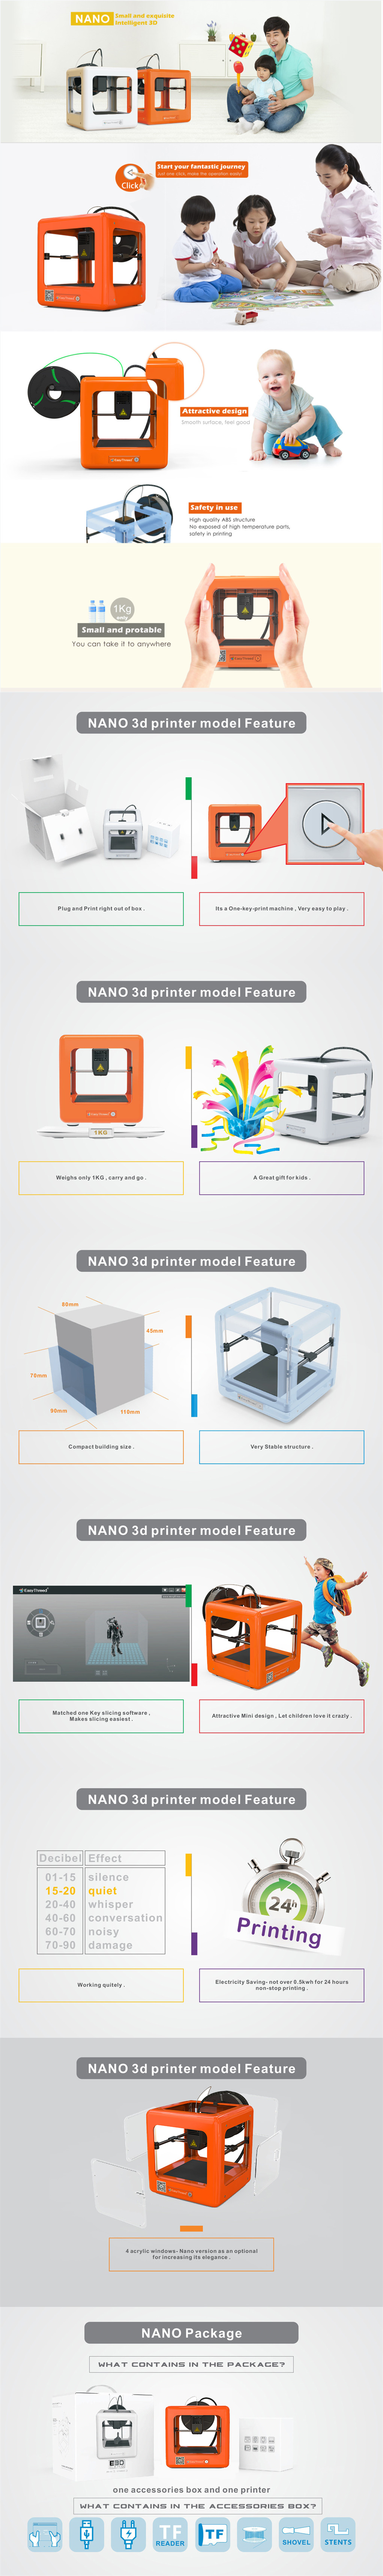 Easythreed® Orange NANO Mini Fully Assembled 3D Printer 90*110*110mm Printing Size Support One Key Printing with CE Certificate/1.75mm 0.4mm Nozzle fo 11